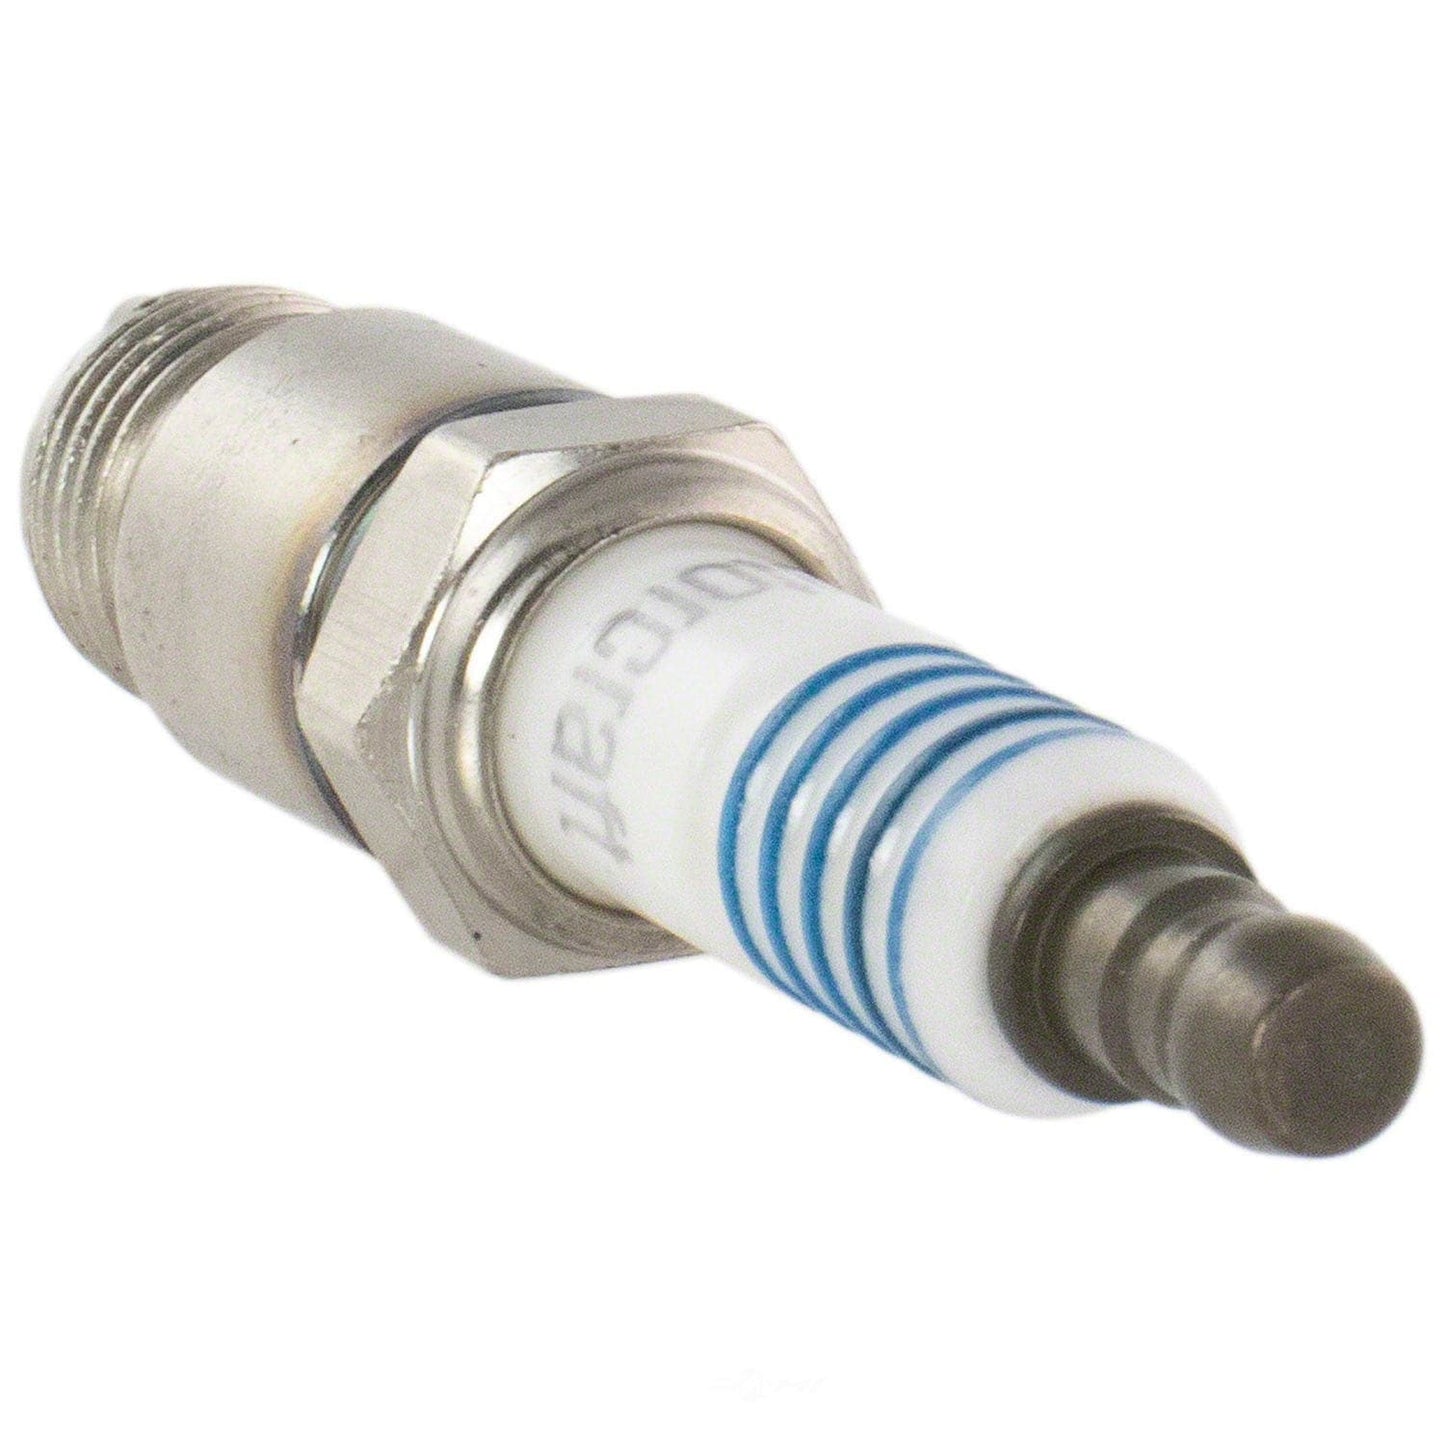 Spark Plugs Ford Mustang 1964 1965 1966 1967 1968 1969 1970 1971 1972 1973